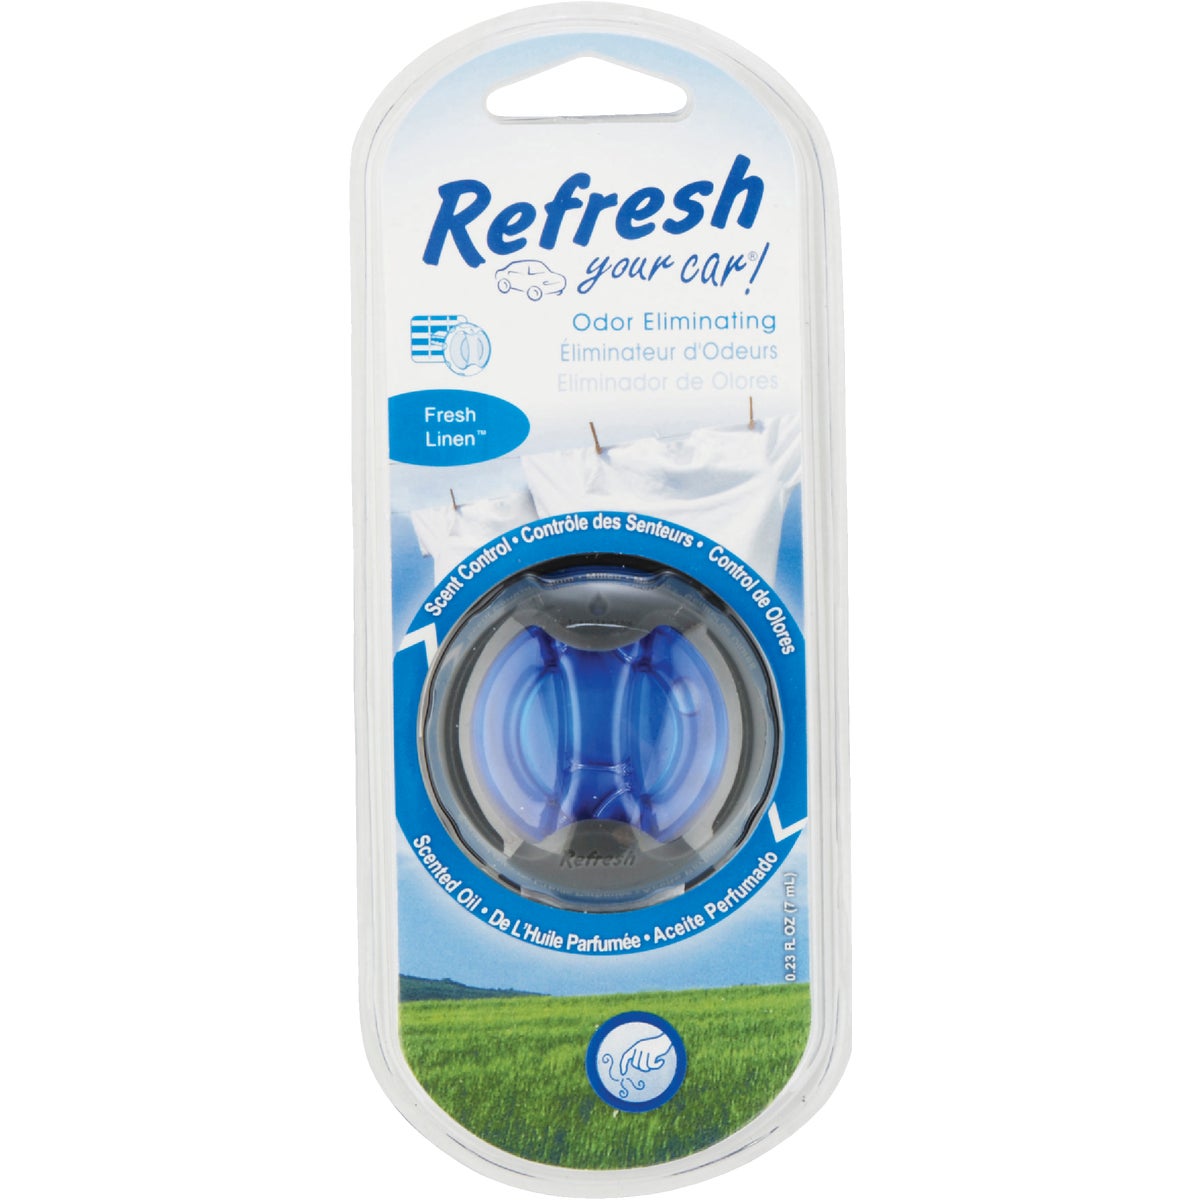 Item 570150, Refresh Your Car delivers quality, innovative products that make time in 